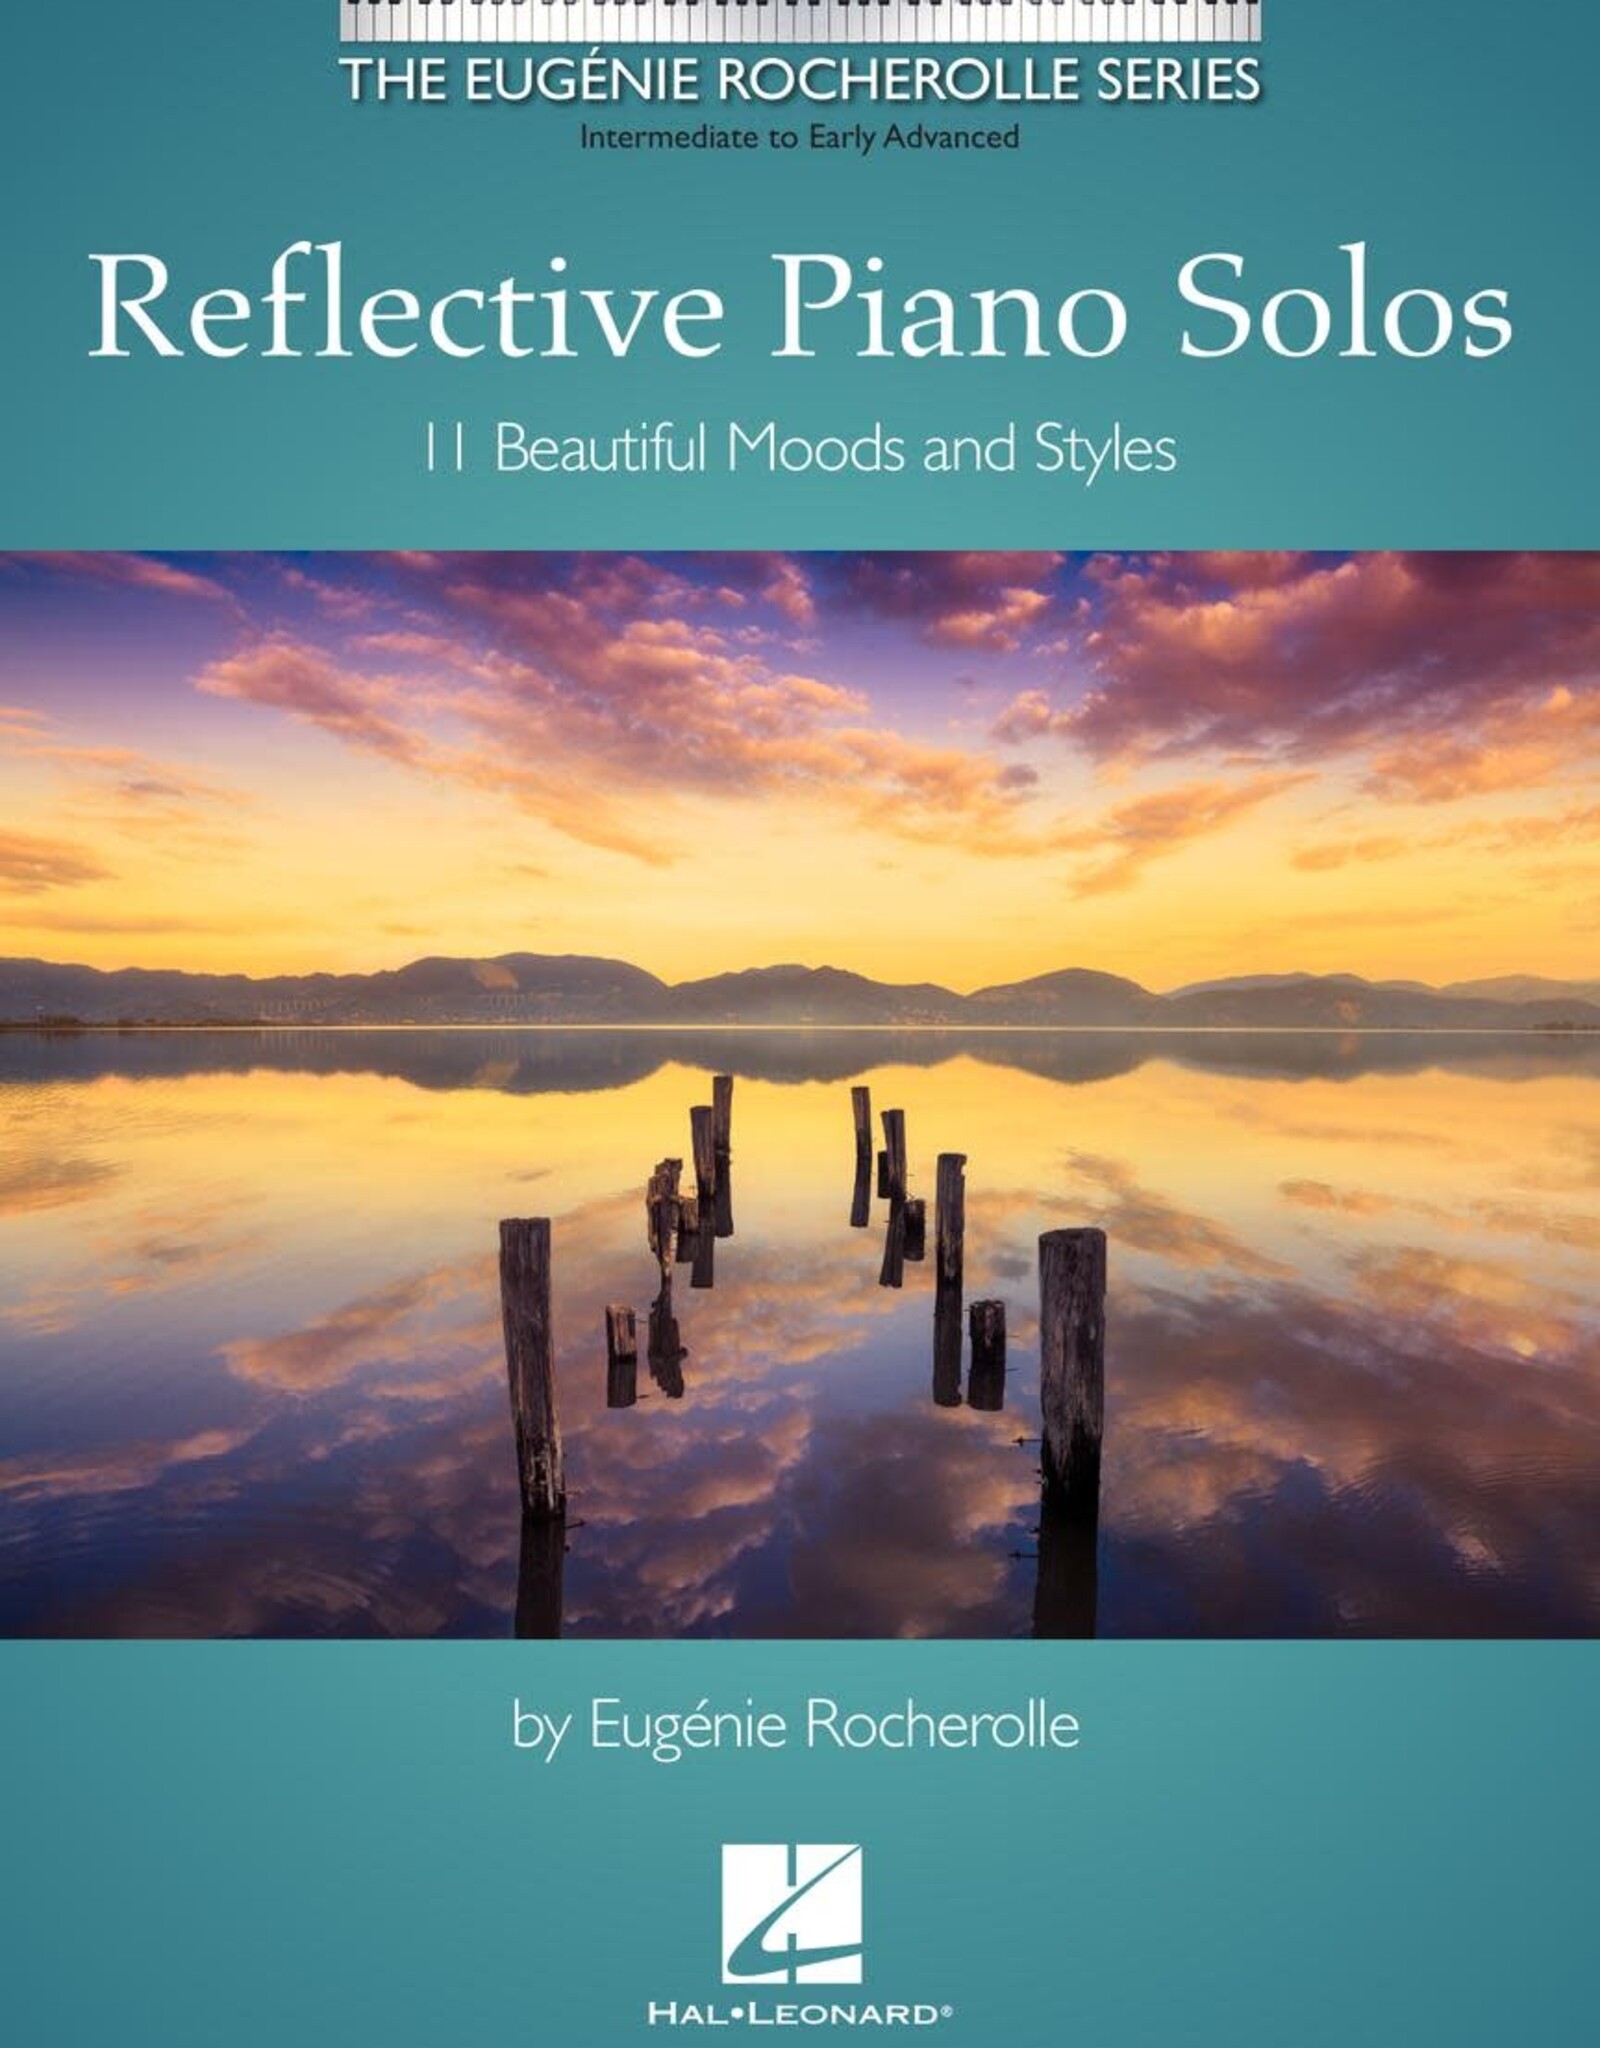 Hal Leonard Reflective Piano Solos - 11 Beautiful Moods and Styles by Eugenie Rocherolle